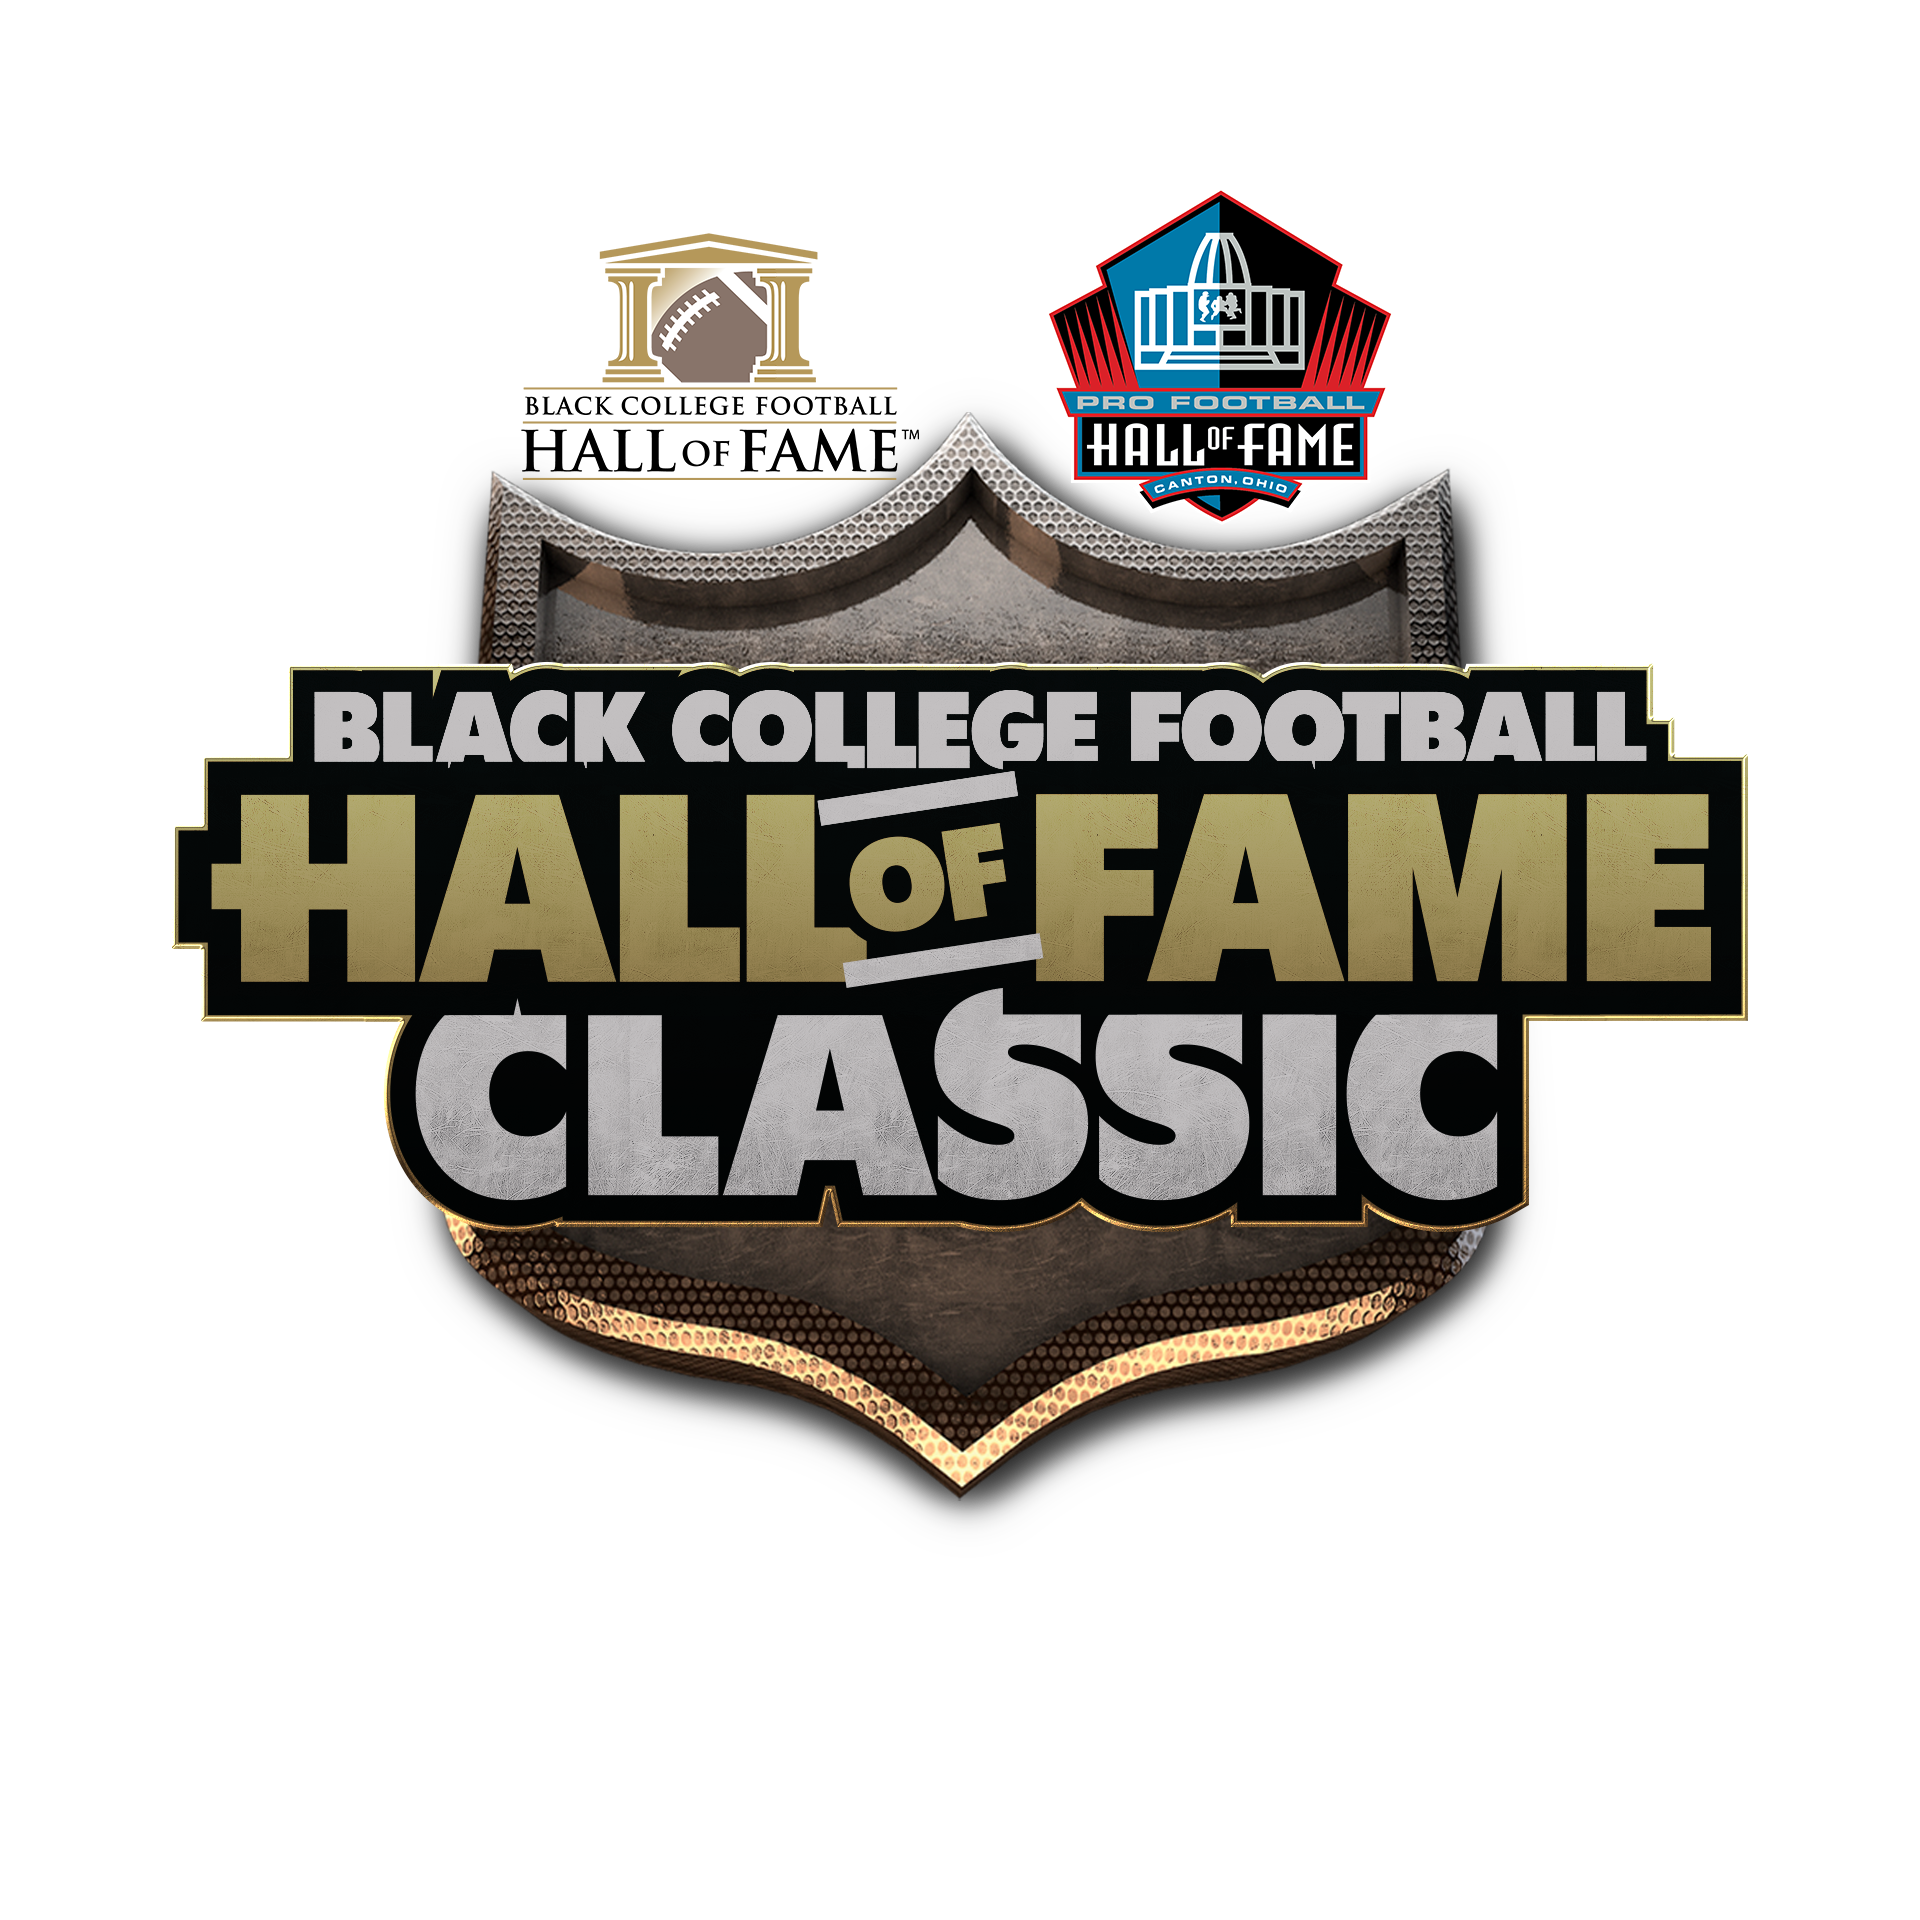 CUMULUS MEDIAs Westwood One Presents Exclusive Audio Coverage of the 2023 Black College Football Hall of Fame Classic